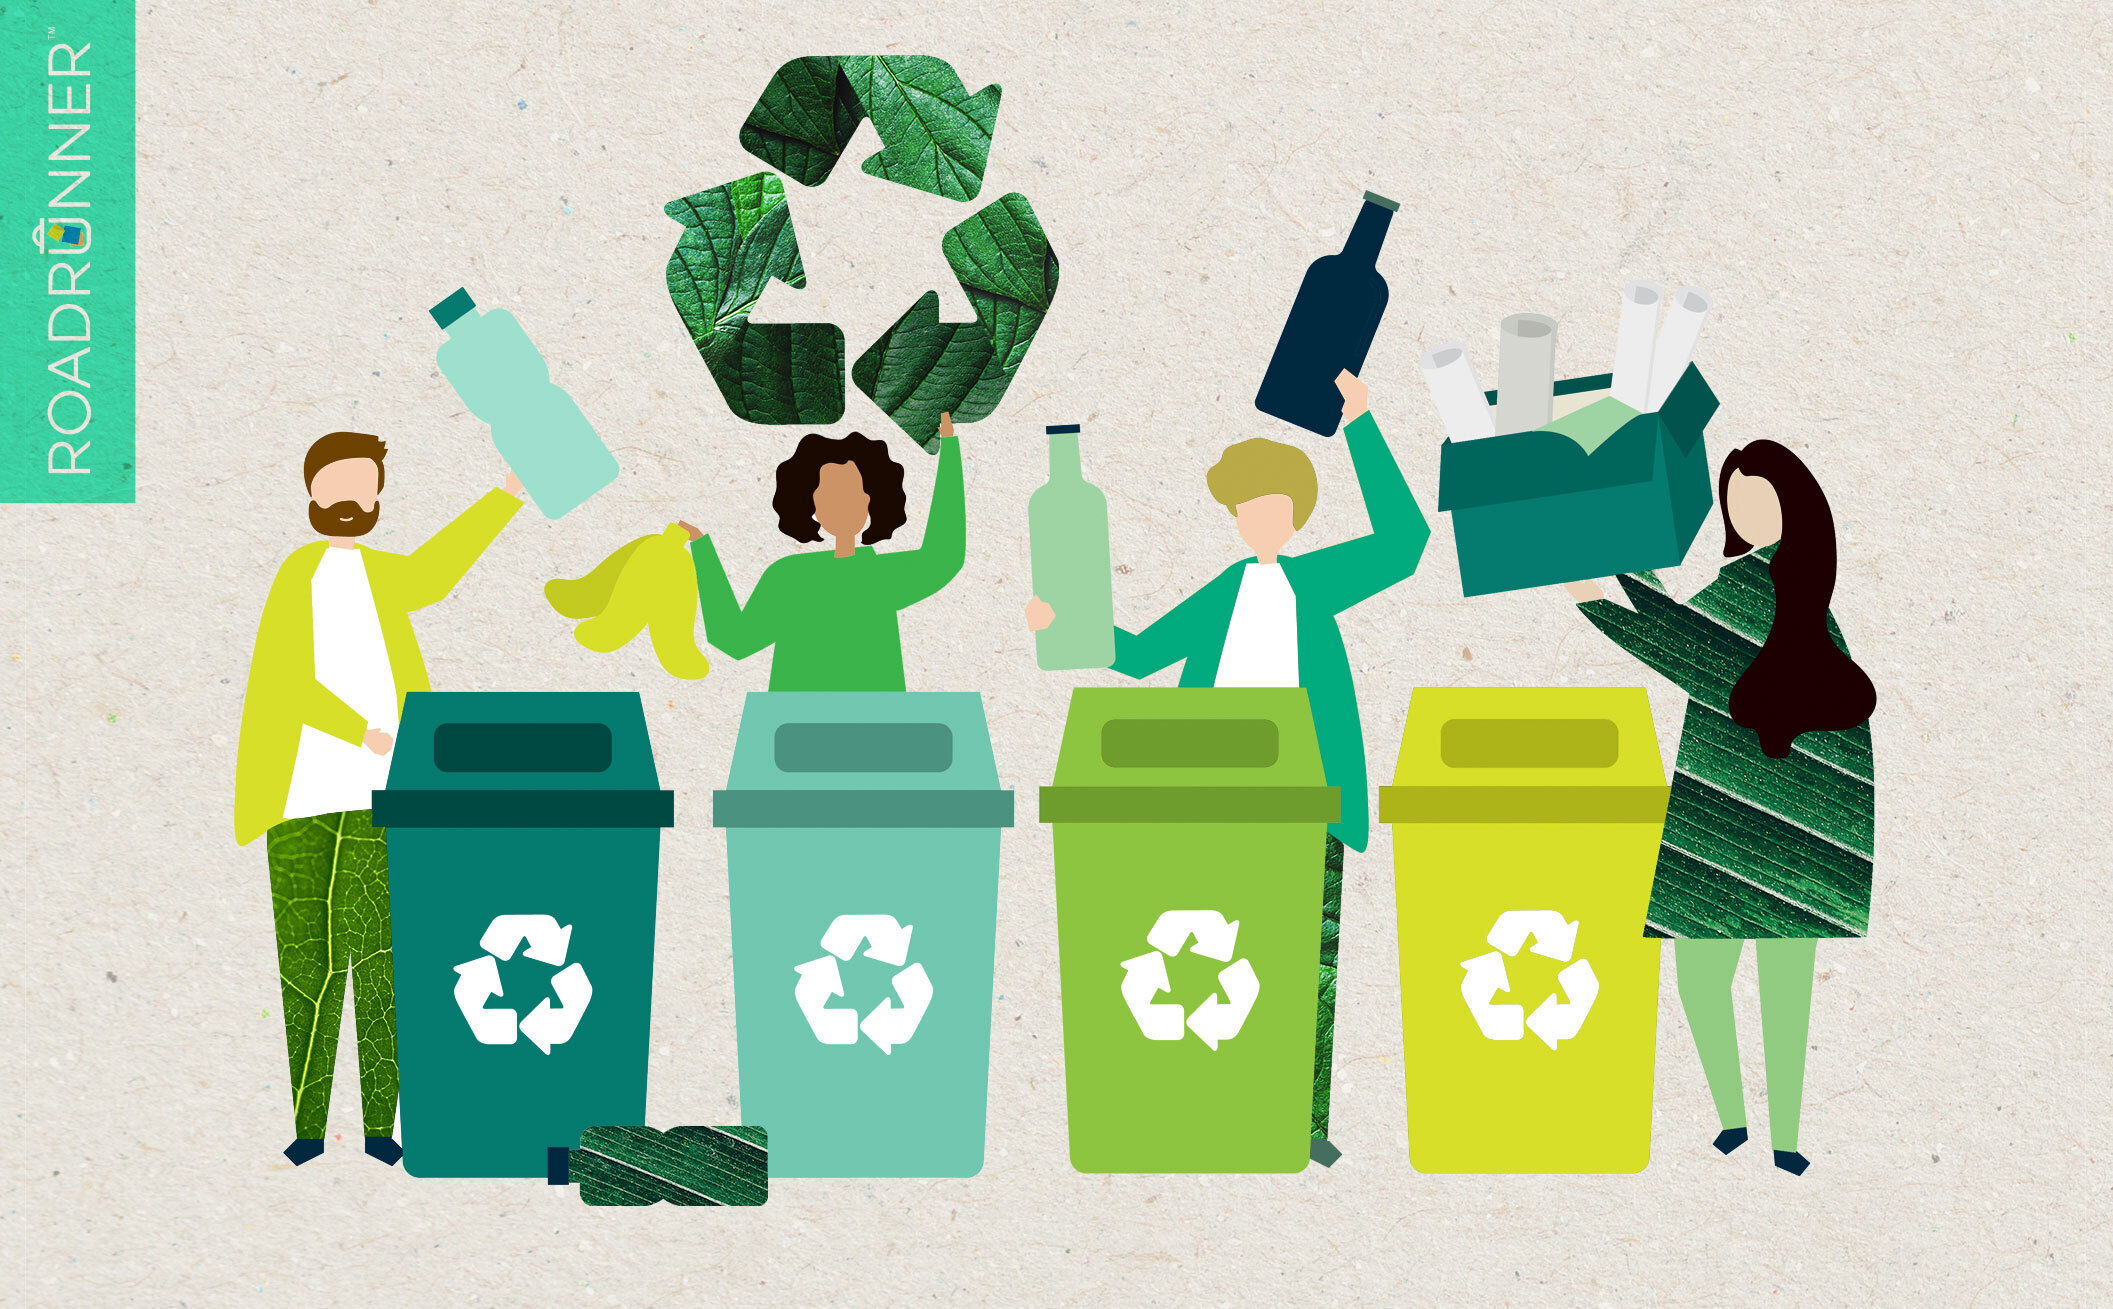 Trust in Recycling is Dropping, Clean-Stream Programs Can Help